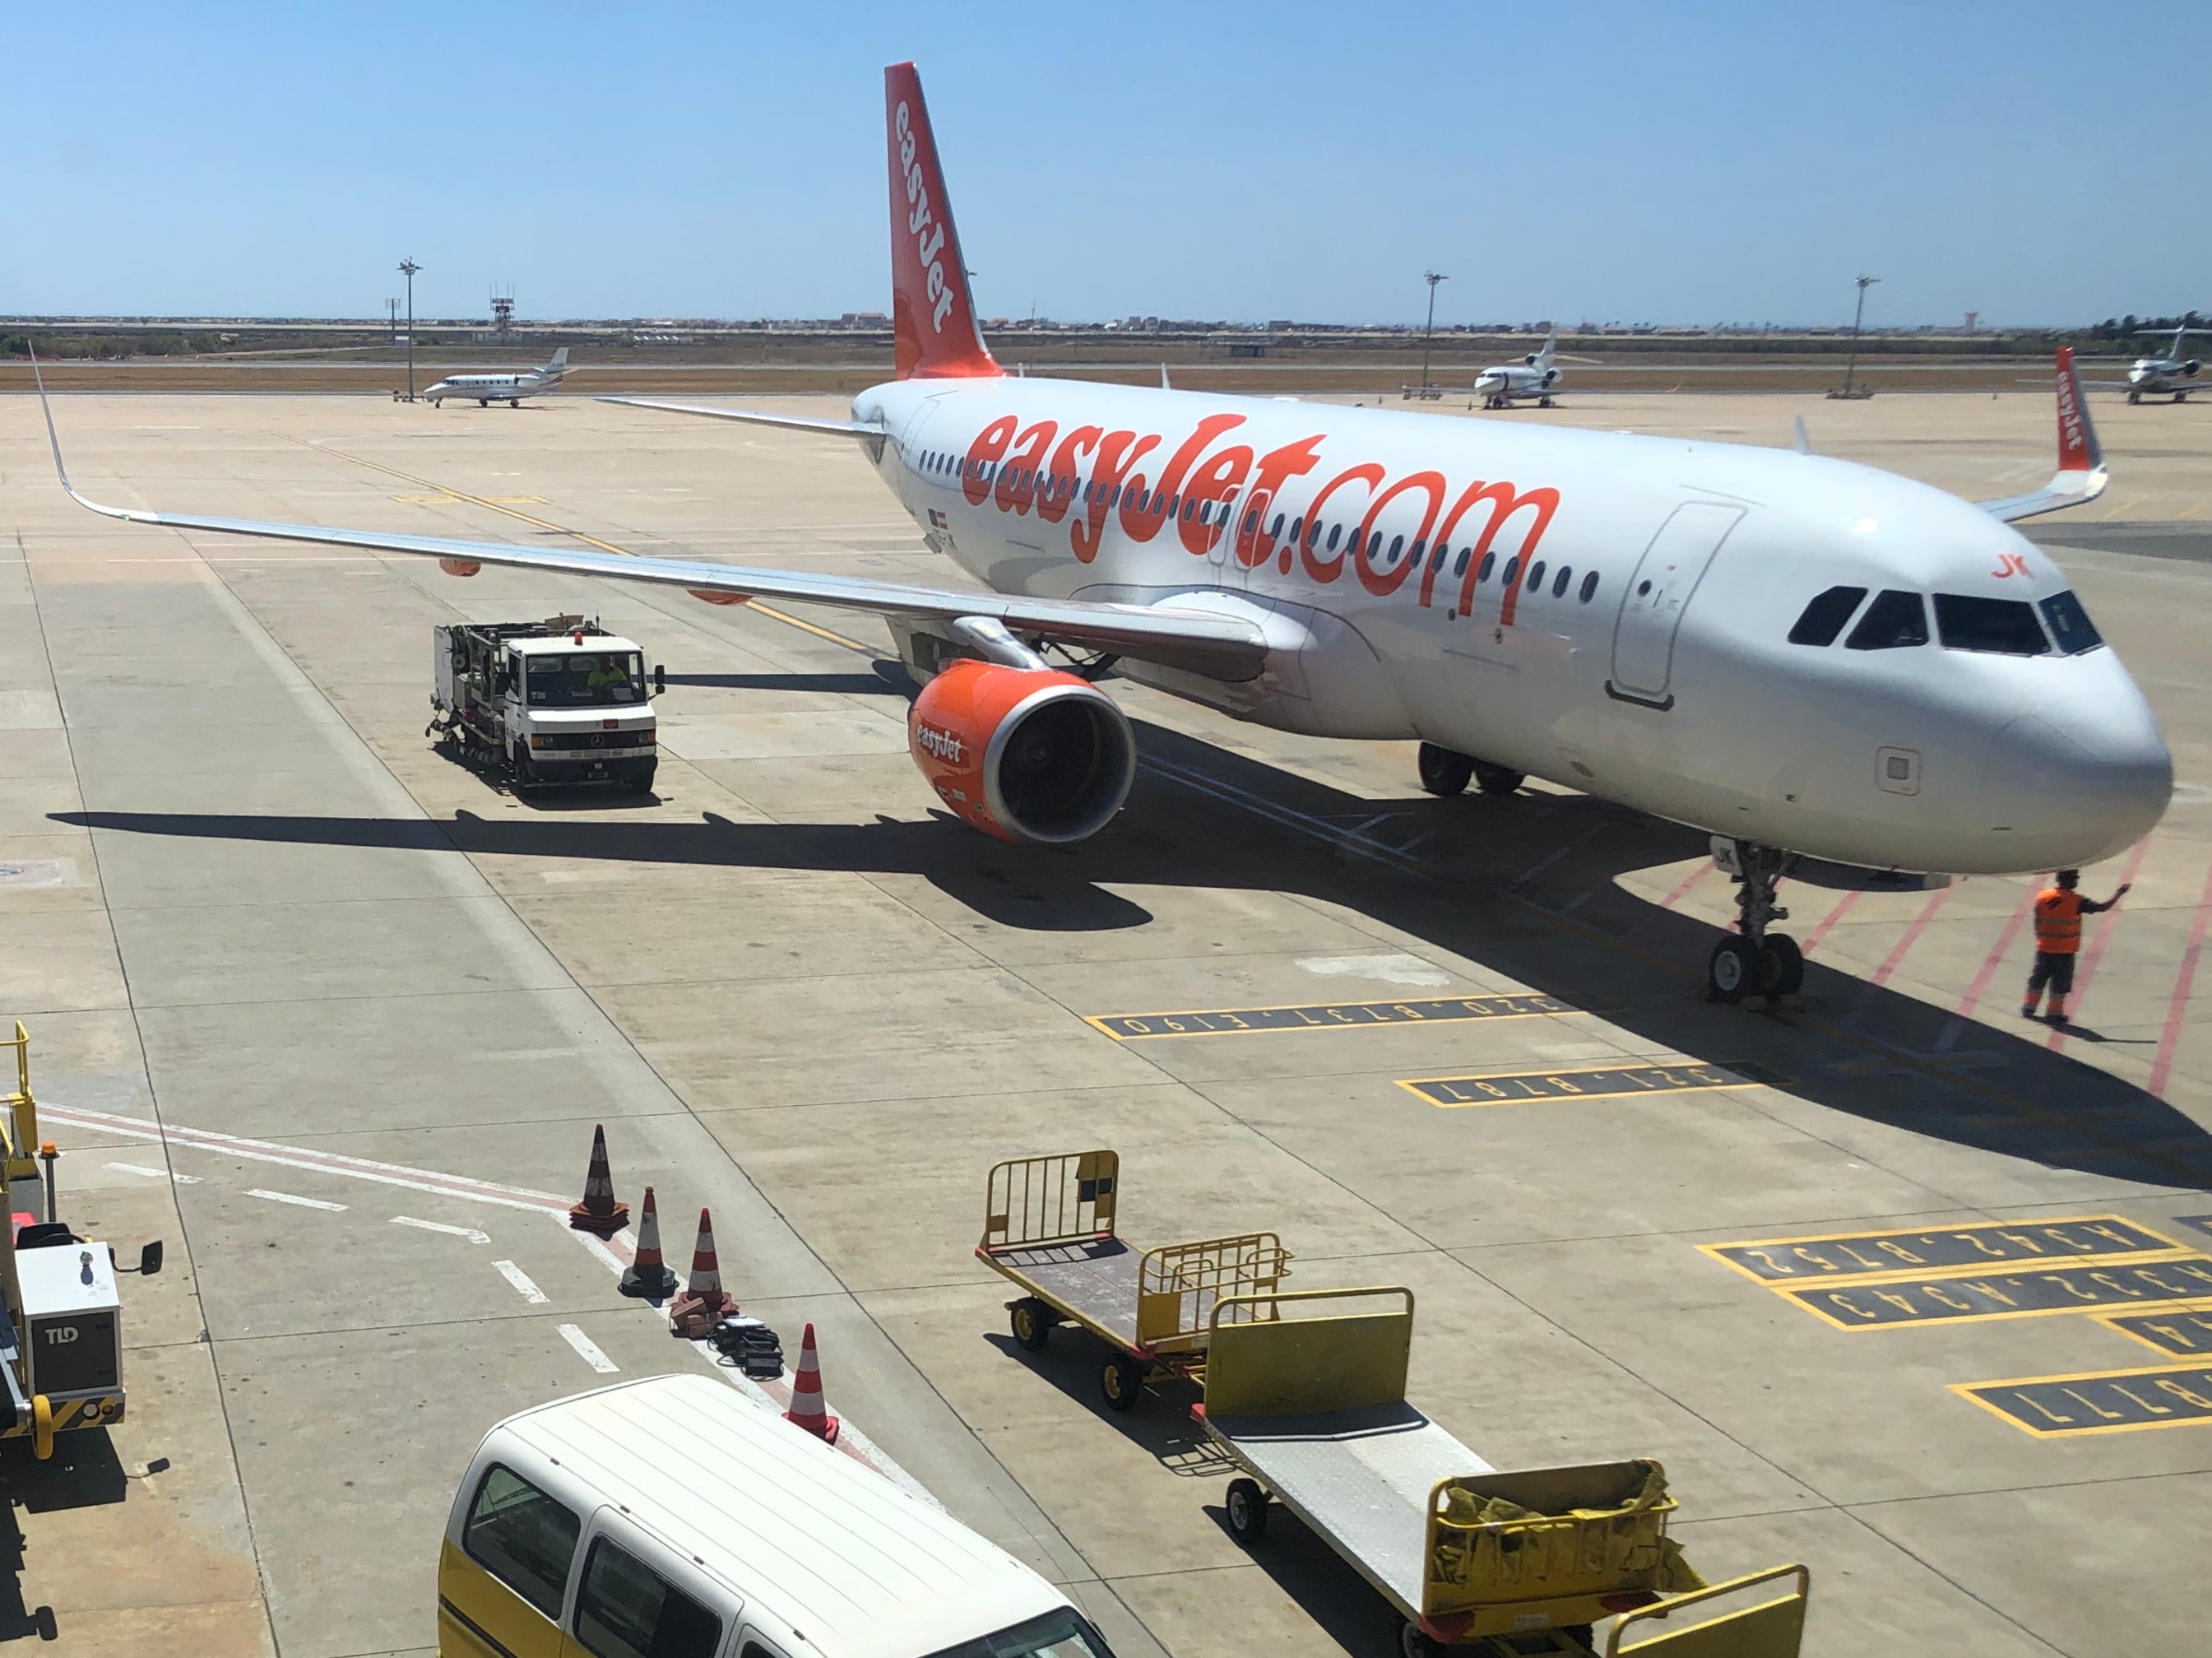 Wish list: an easyJet Airbus A320 at Faro airport in Portugal